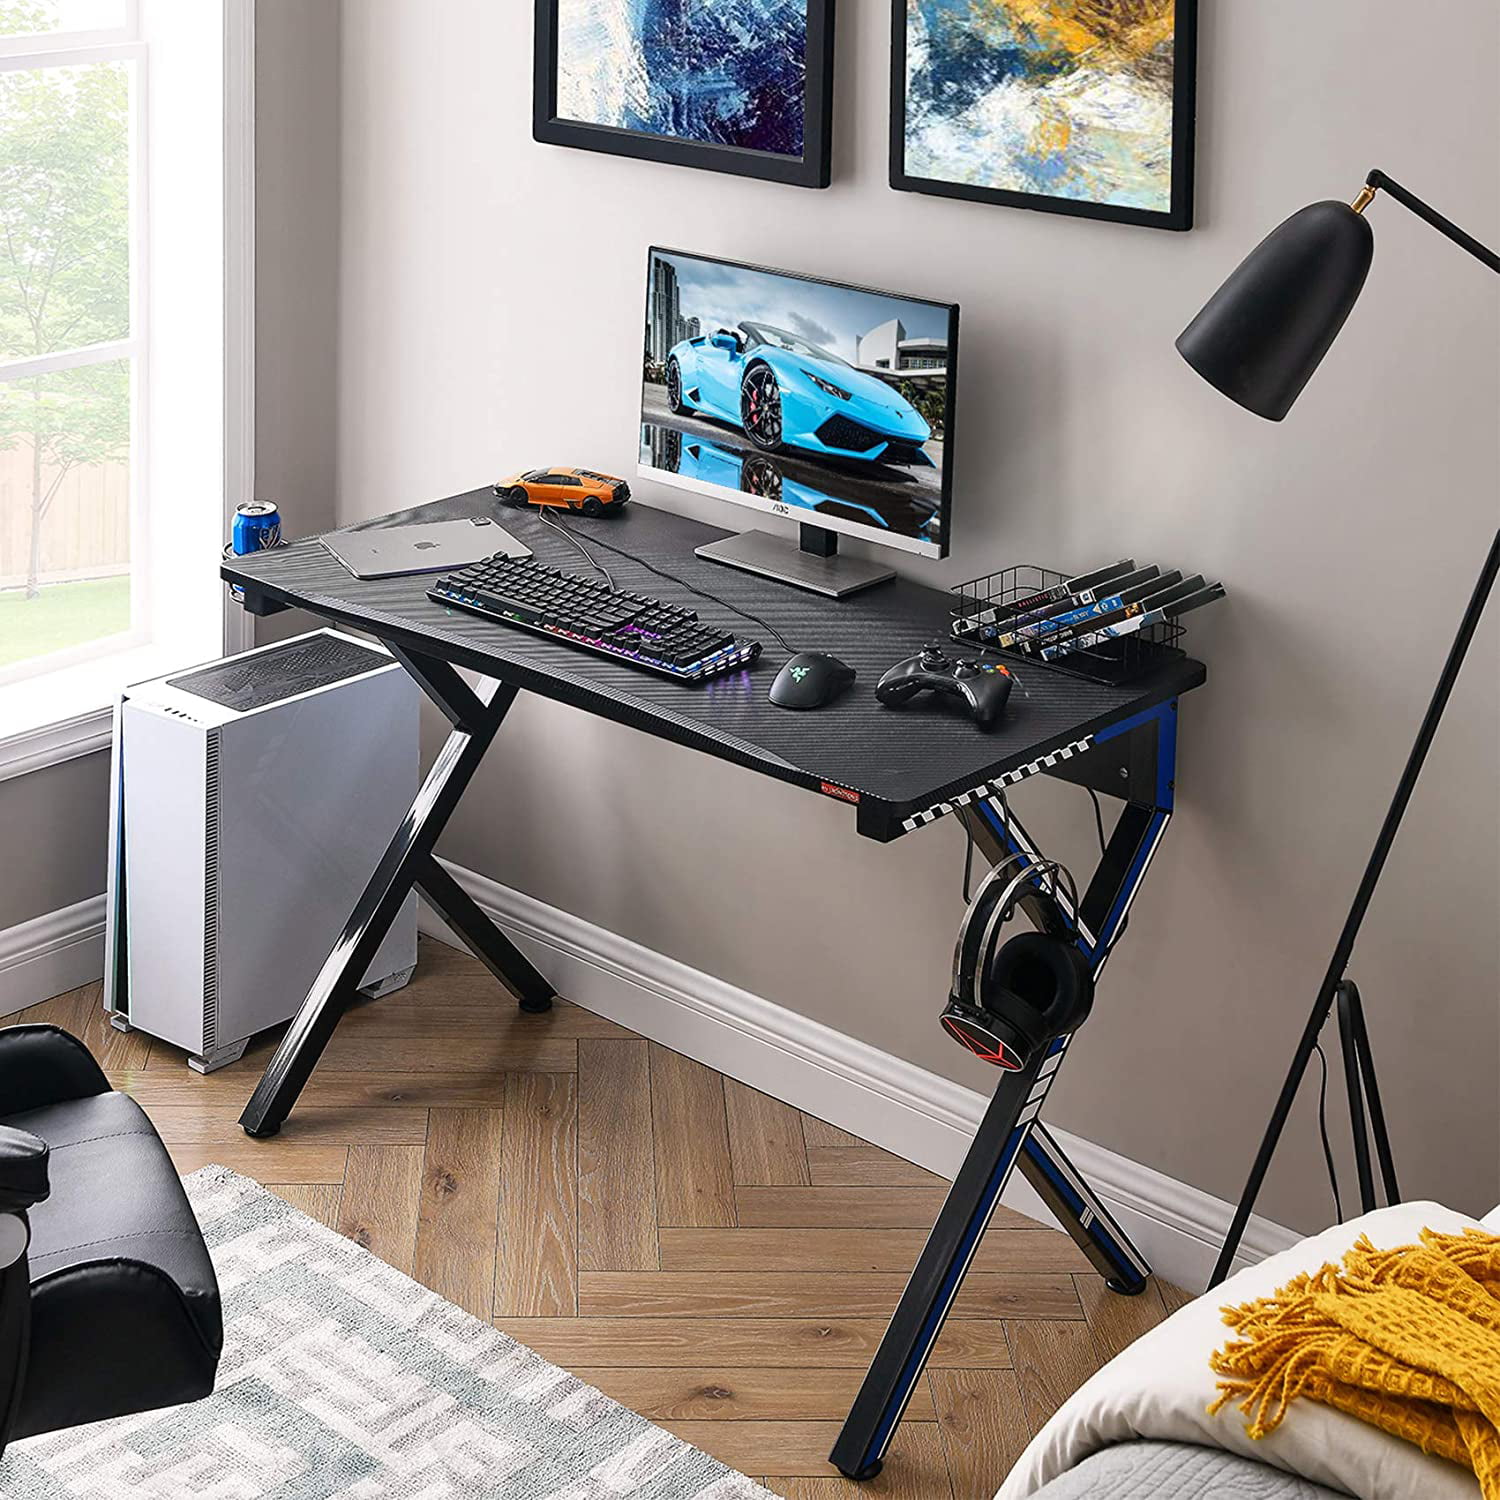 Headphone Hook PC Gaming Workstation Built-in 3-Outlet Socket & 2 USB Ports Home Office Computer Desk ZENY Gaming Desk with Carbon Fiber Surface 45.2 W x 23.6 D x 30.4’’H Cup Holder